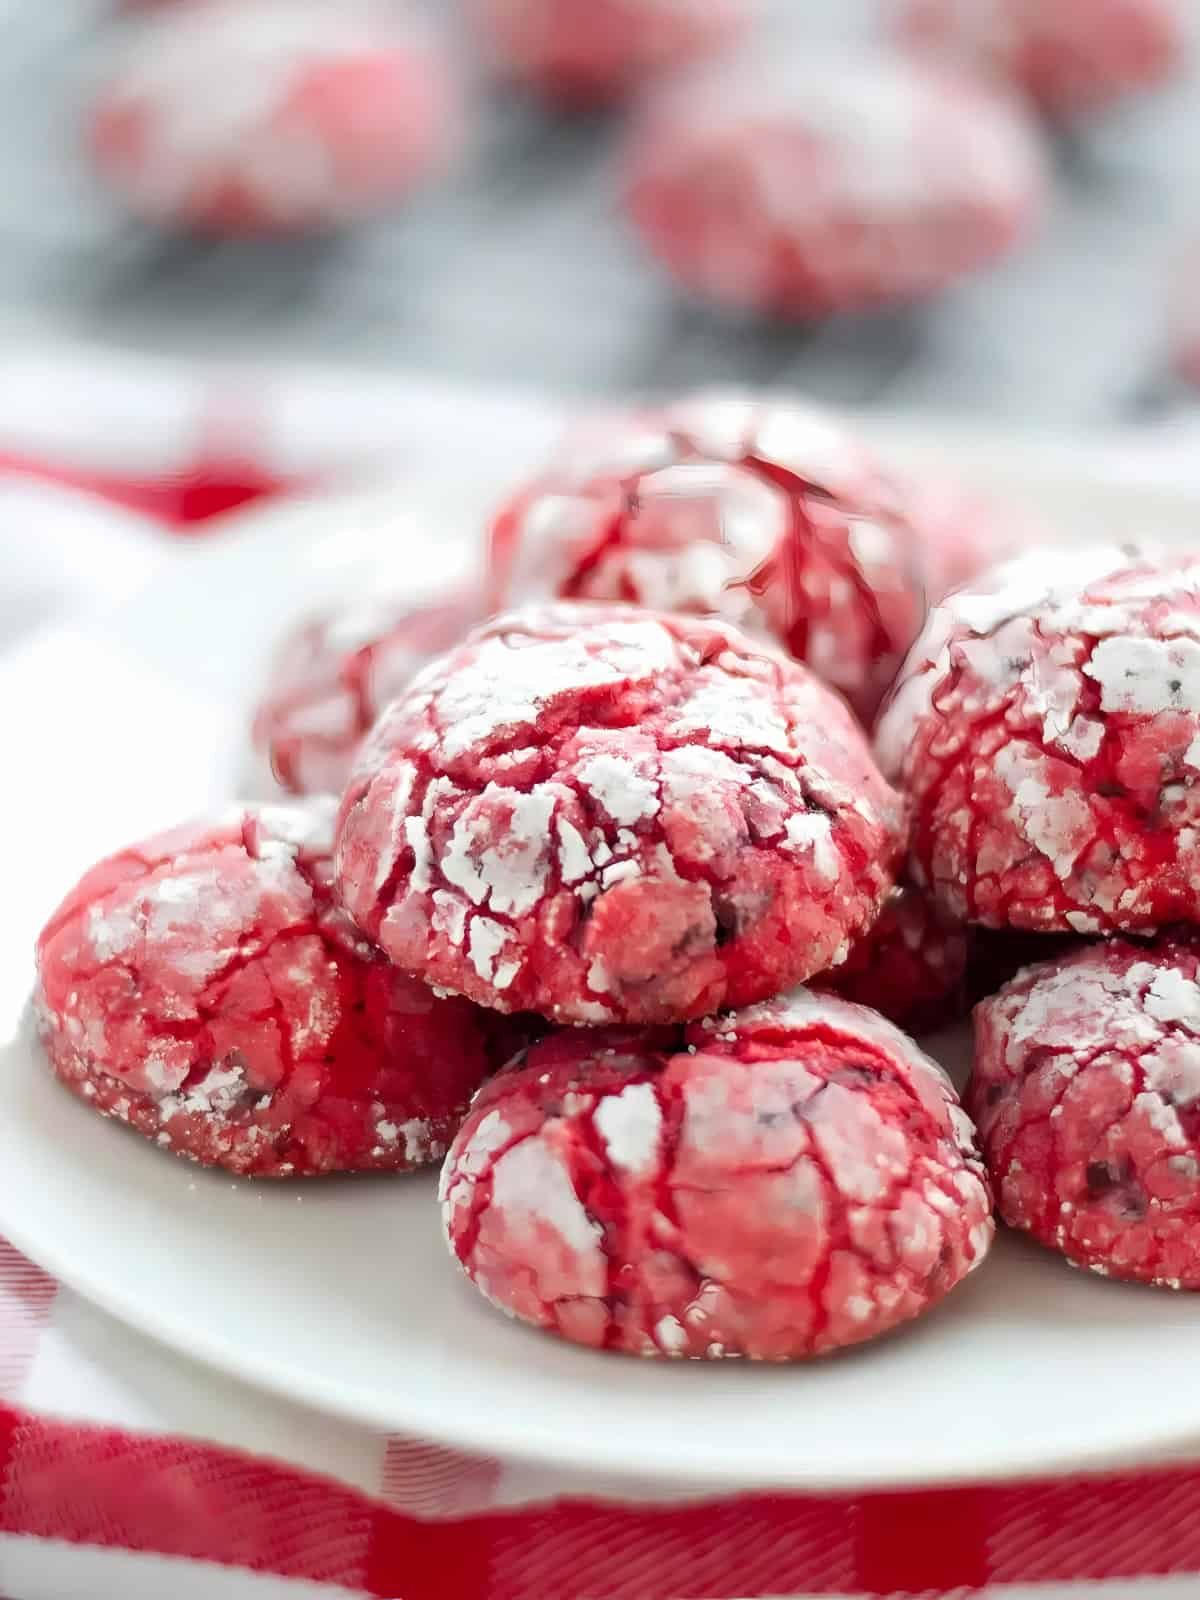 A plate of cherry flavored chocolate chip crinkles.